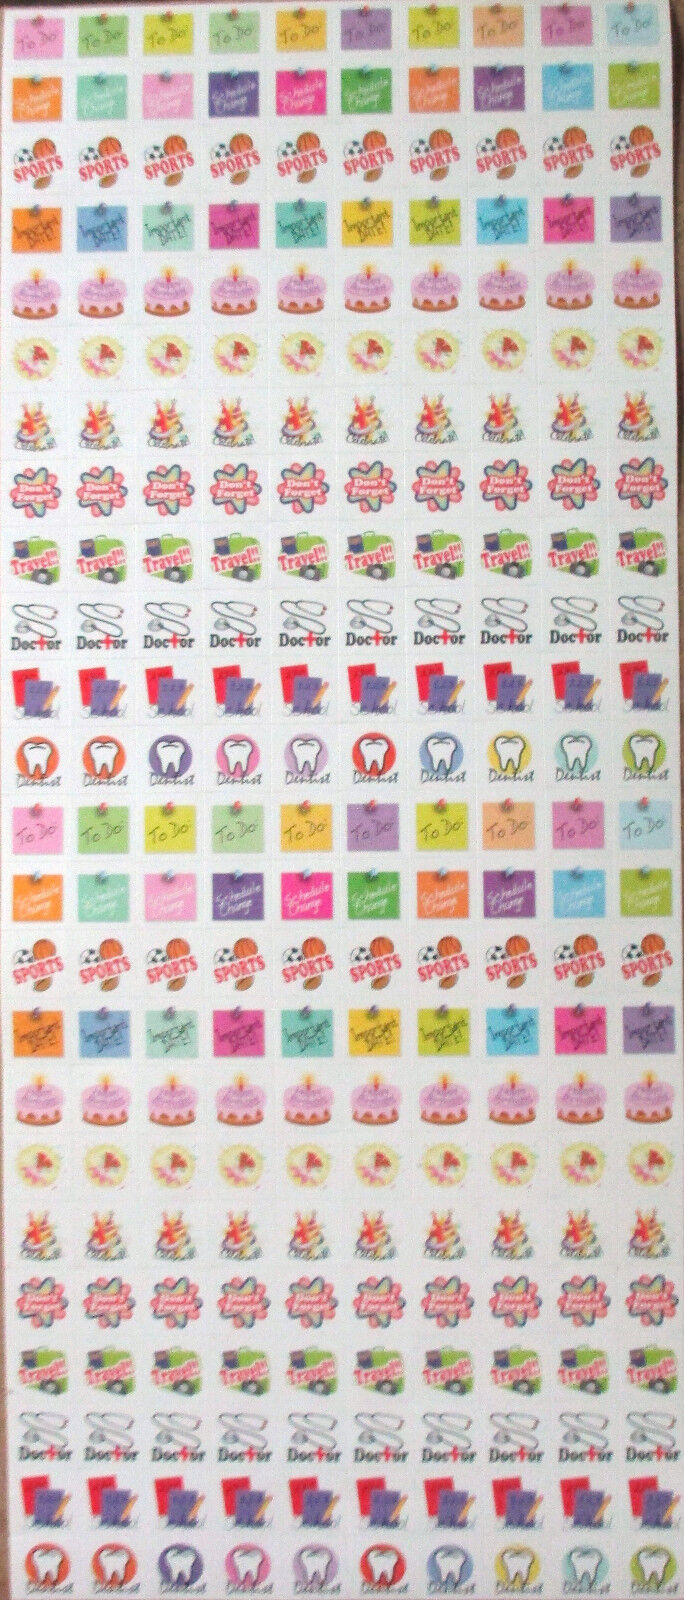 Planner Calendar Stickers 240 Appointment Event Reminders Dentist, Doctor, More